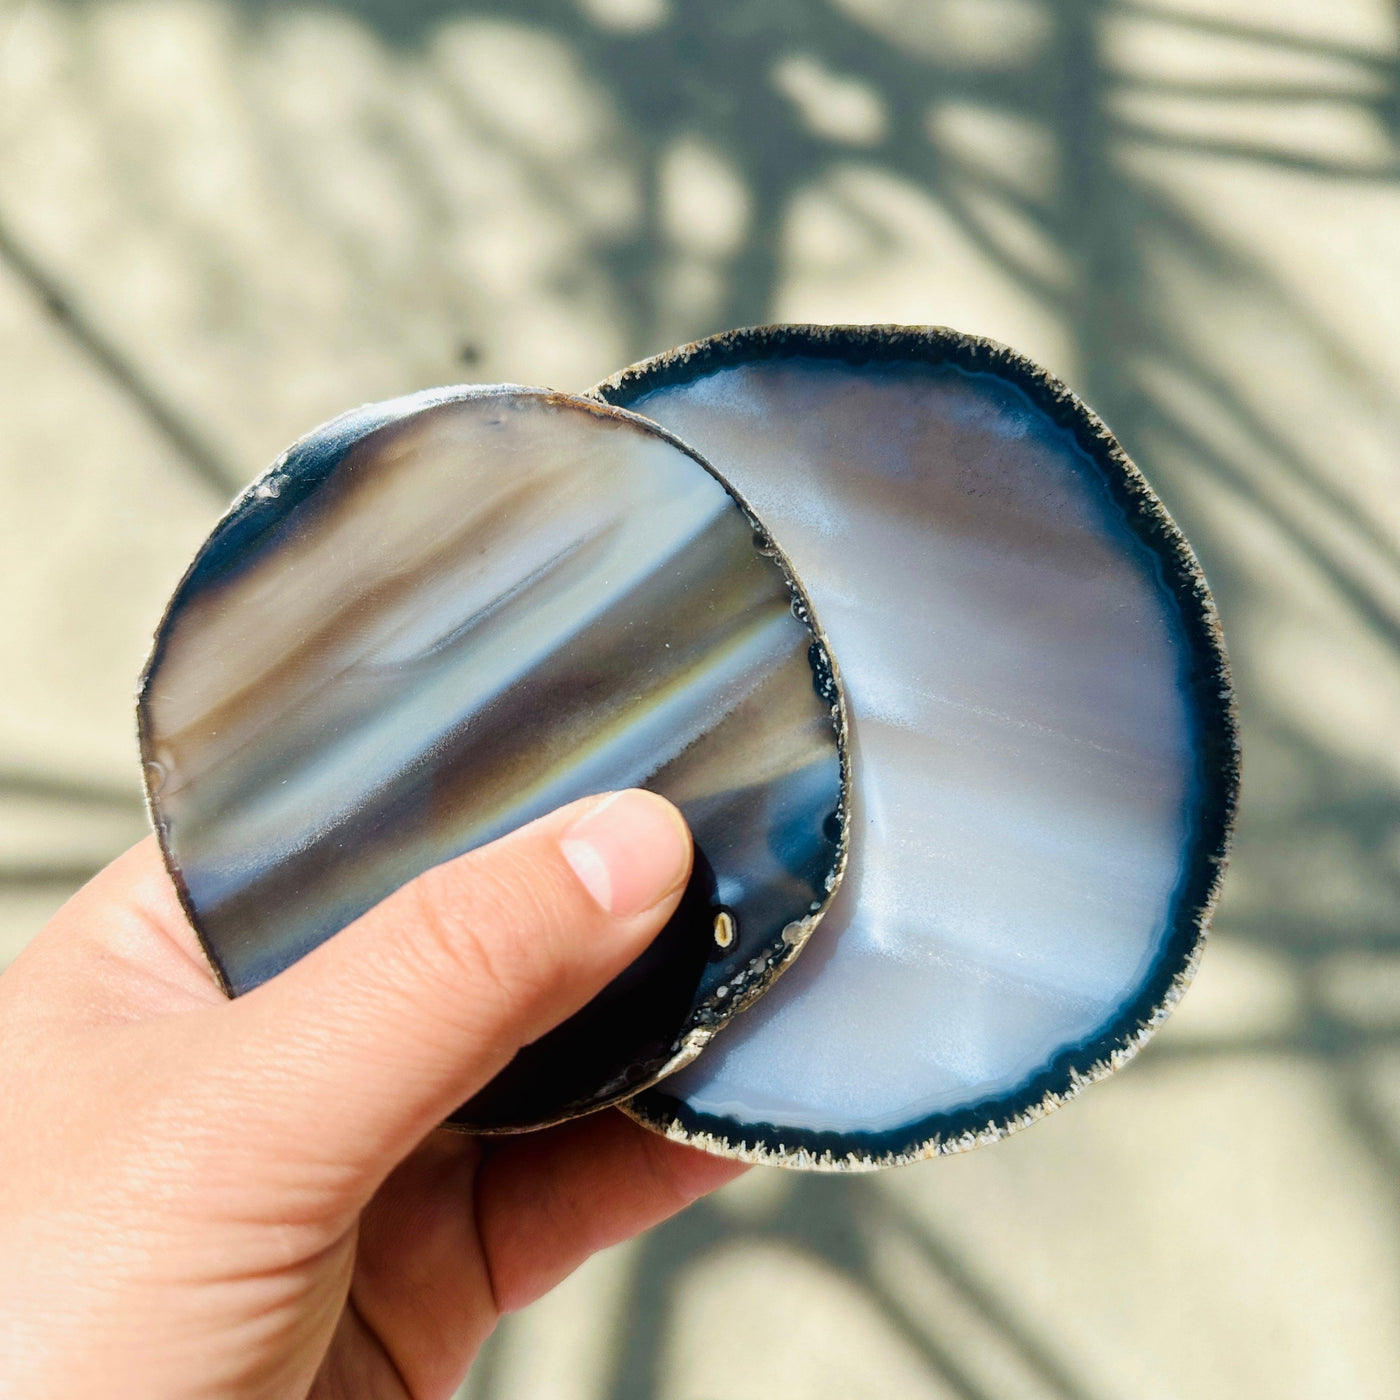  Agate Slice Set - Set of Two Agate Crystal Coasters in hand for size reference